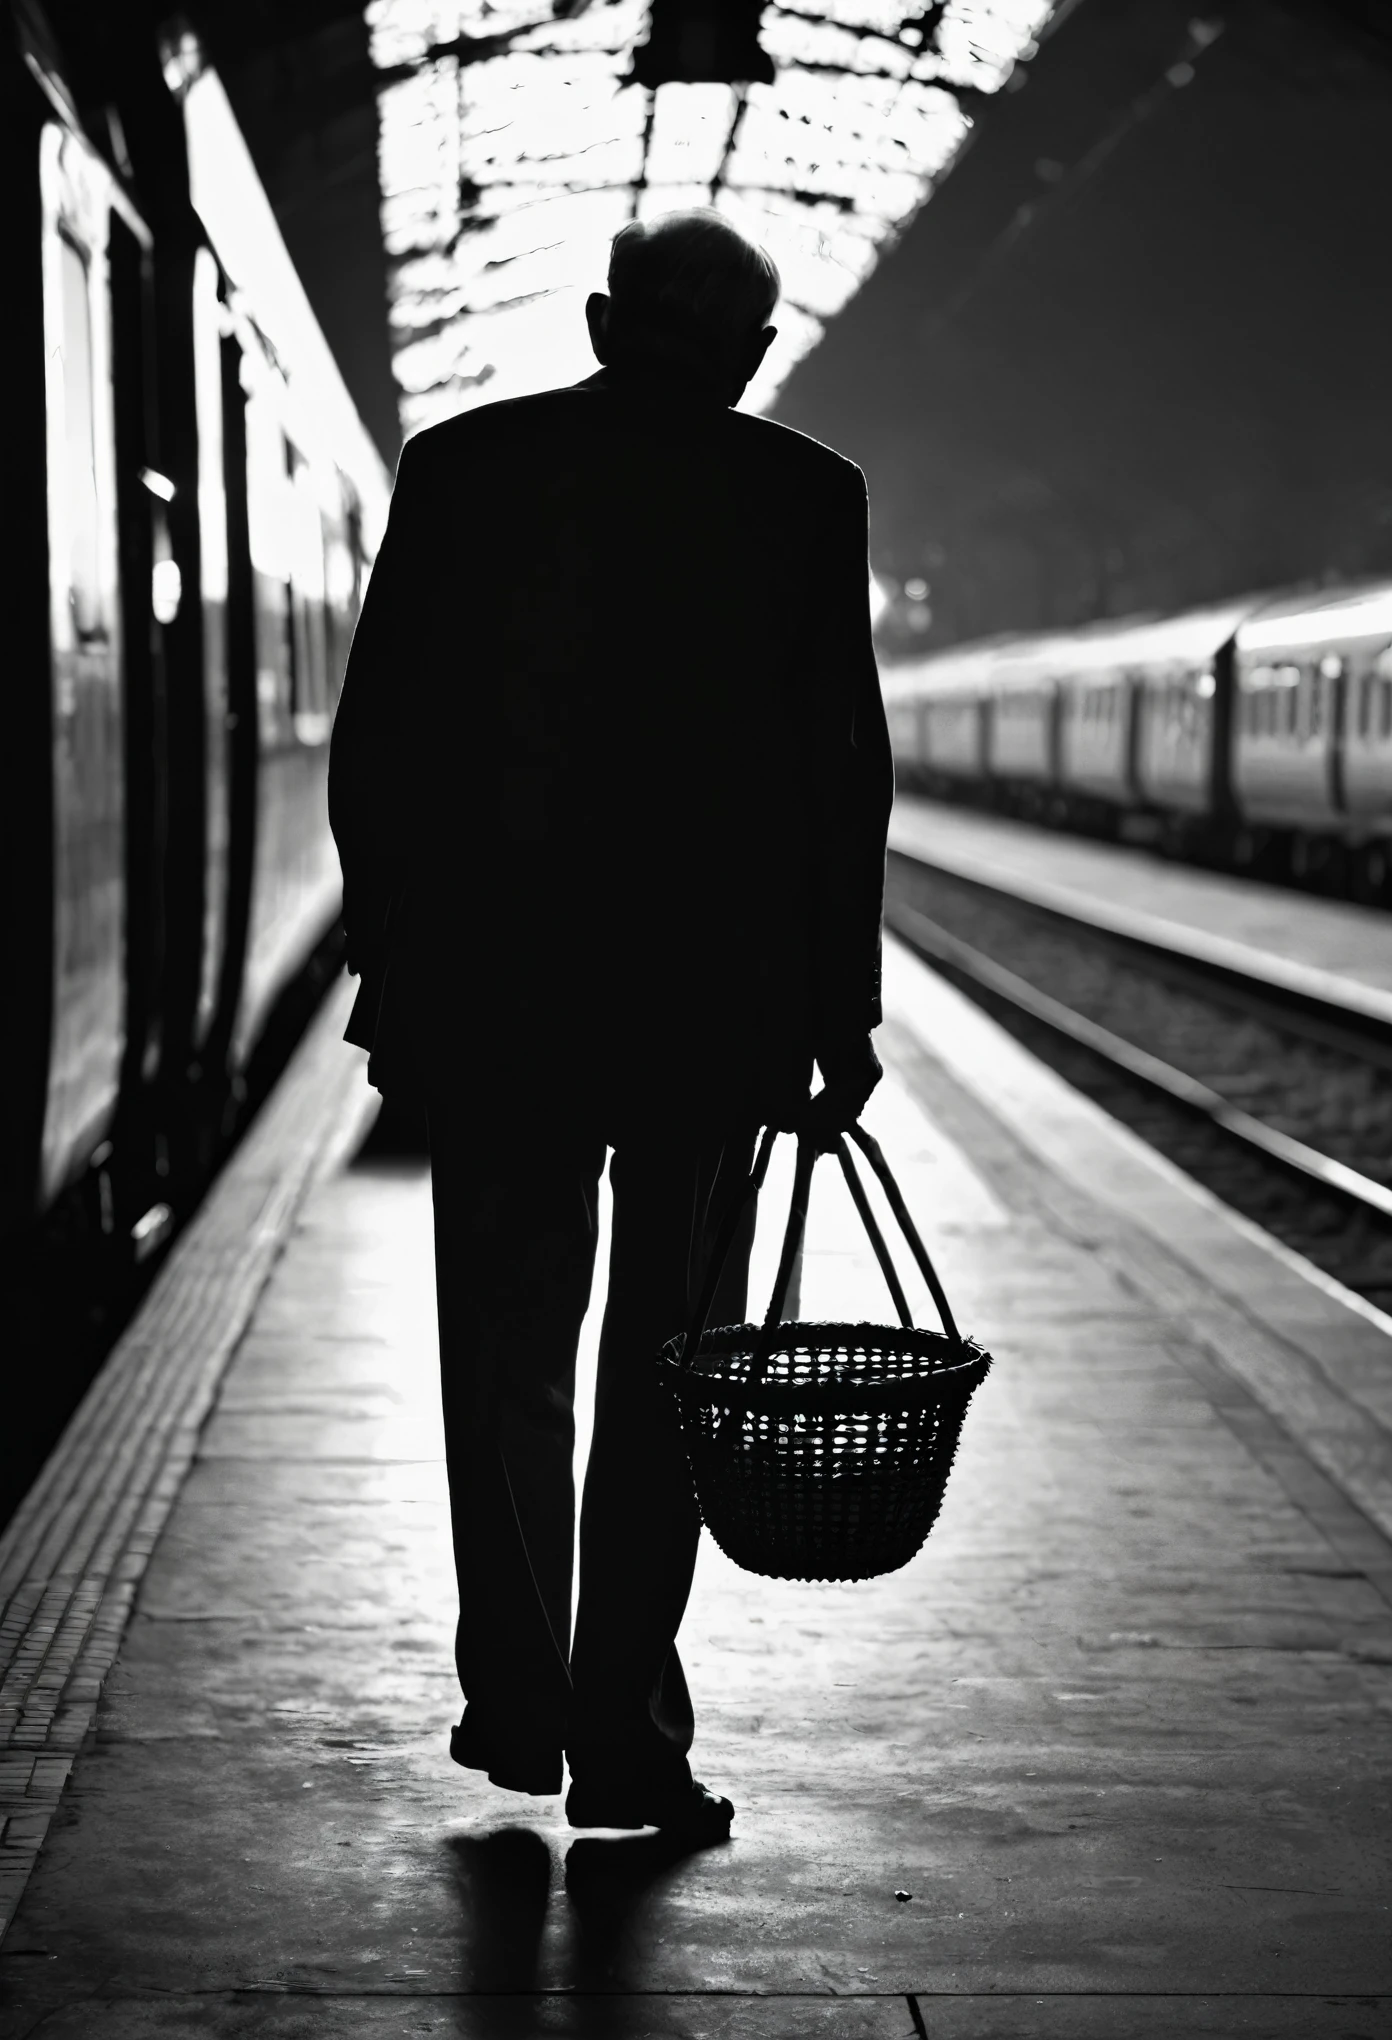 A silhouette of an elderly man back view,bent over, carrying a basket of oranges on a railway platform. The setting is a dimly lit station, with trains and passengers in the distance. The man's back is broad yet stooped, showing the weight of years and responsibilities. His hands are gnarled and calloused, grasping the handle of the basket tightly. His face is unseen, focusing the viewer's attention on the emotional depth of his posture and silhouette. The mood is melancholic yet filled with a sense of love and sacrifice.
